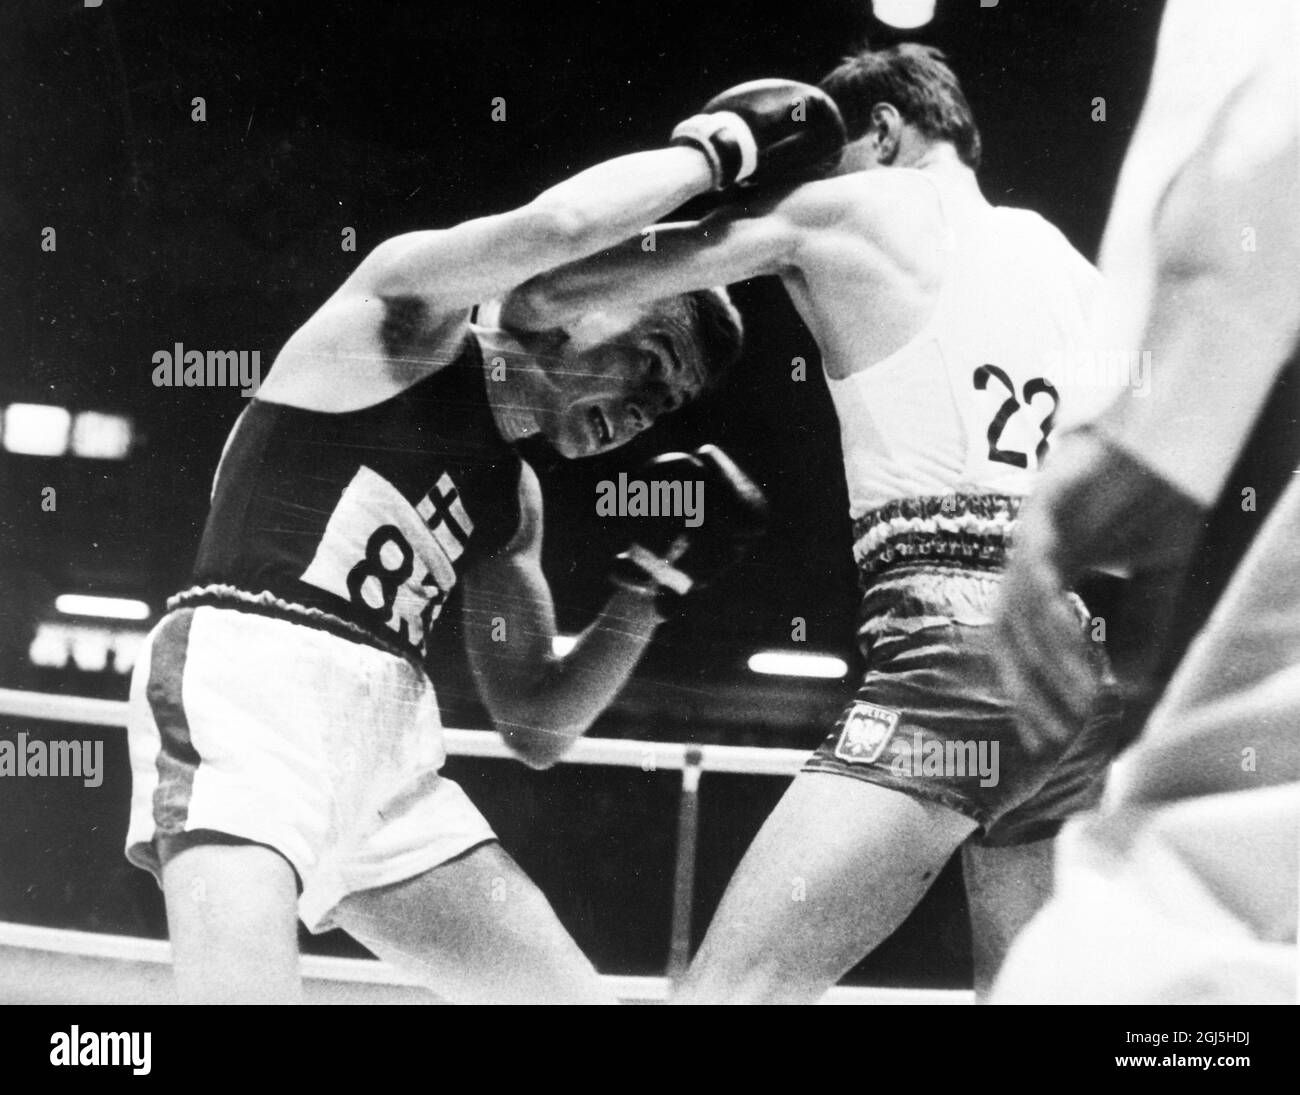 OLYMPICS, OLYMPIC SPORT GAMES - THE XVIII 18TH OLYMPIAD IN TOKYO, JAPAN - BOXING OLYMPICS LIGHT MIDDLE GRESIAK BEATS MATTSSON ON POINTS ; 20 OCTOBER 1964 Stock Photo